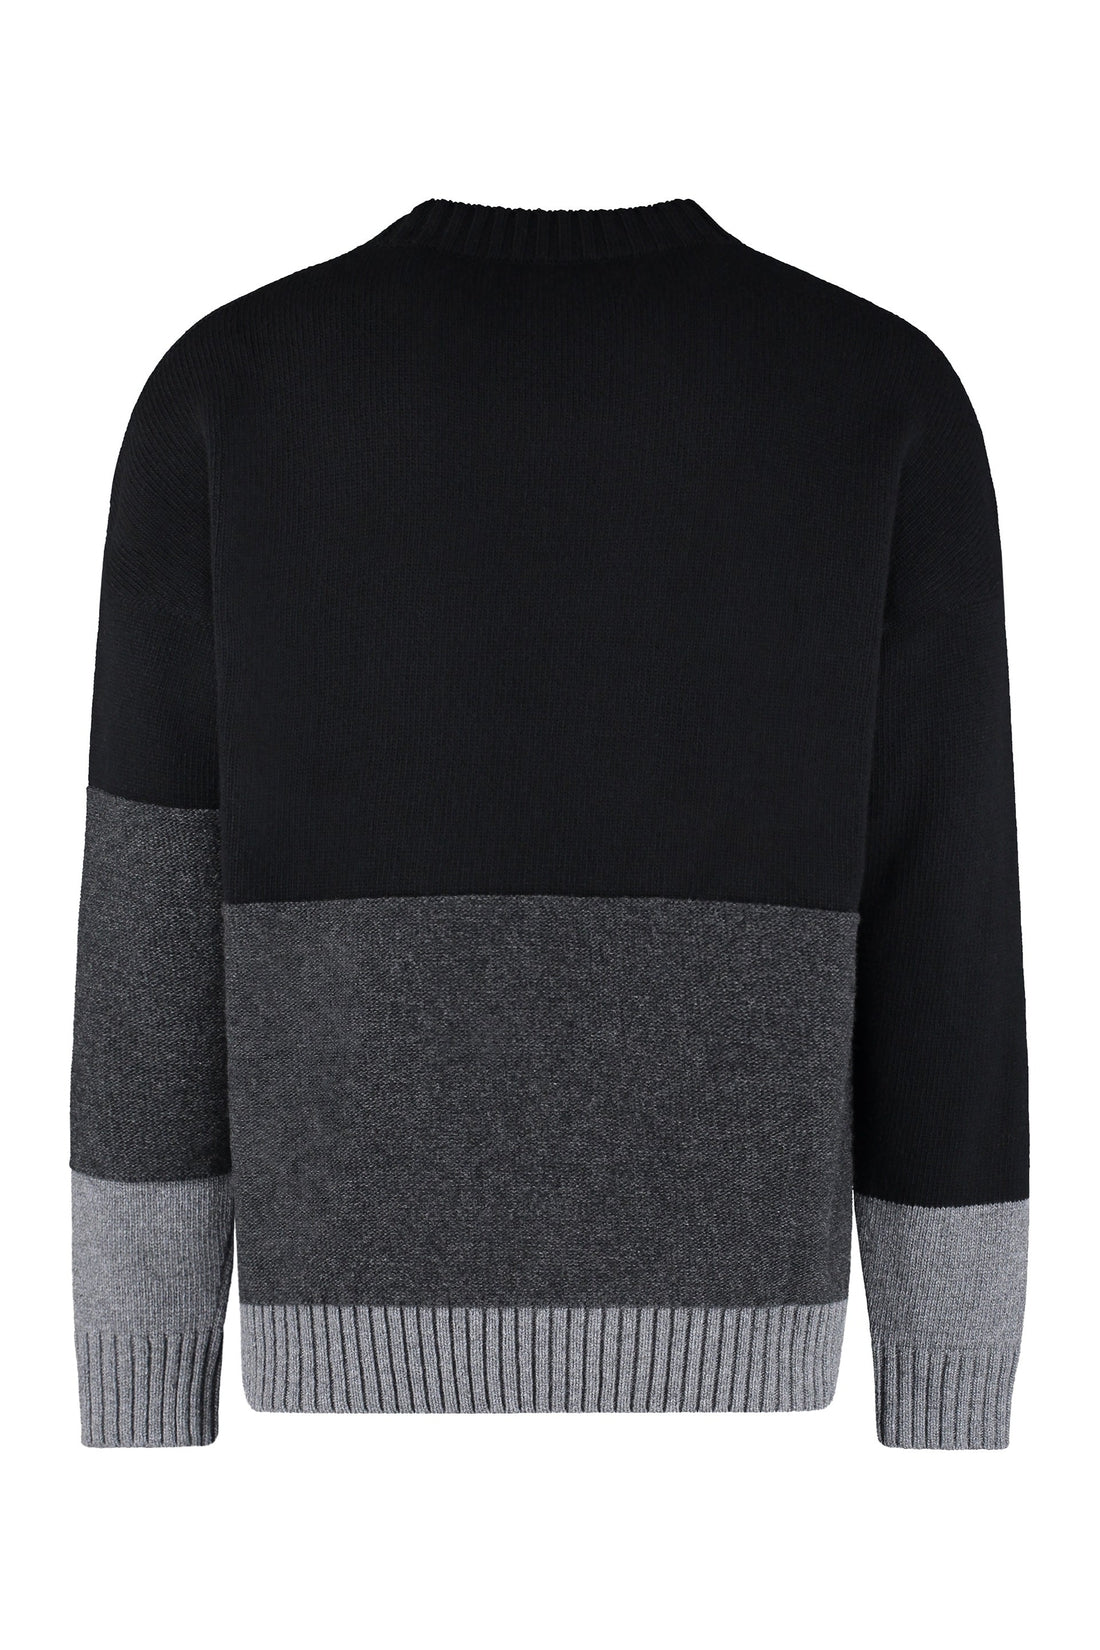 Off-White-OUTLET-SALE-Crew-neck wool sweater-ARCHIVIST